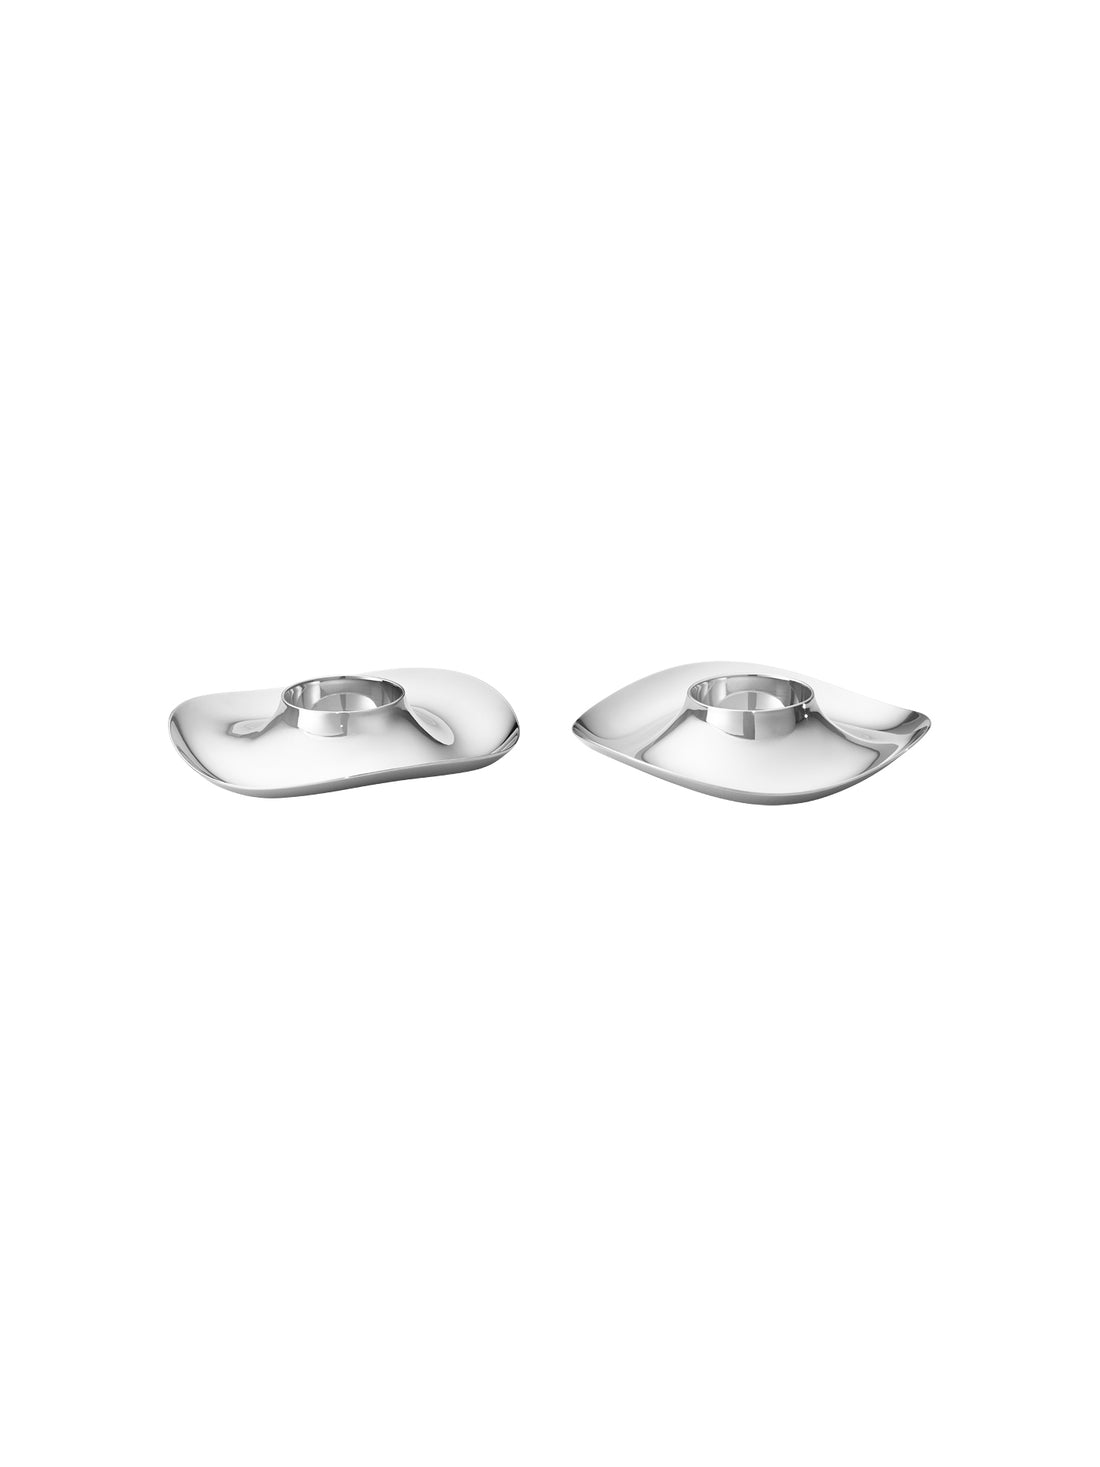 Design stainless steel egg cups (2 pieces)